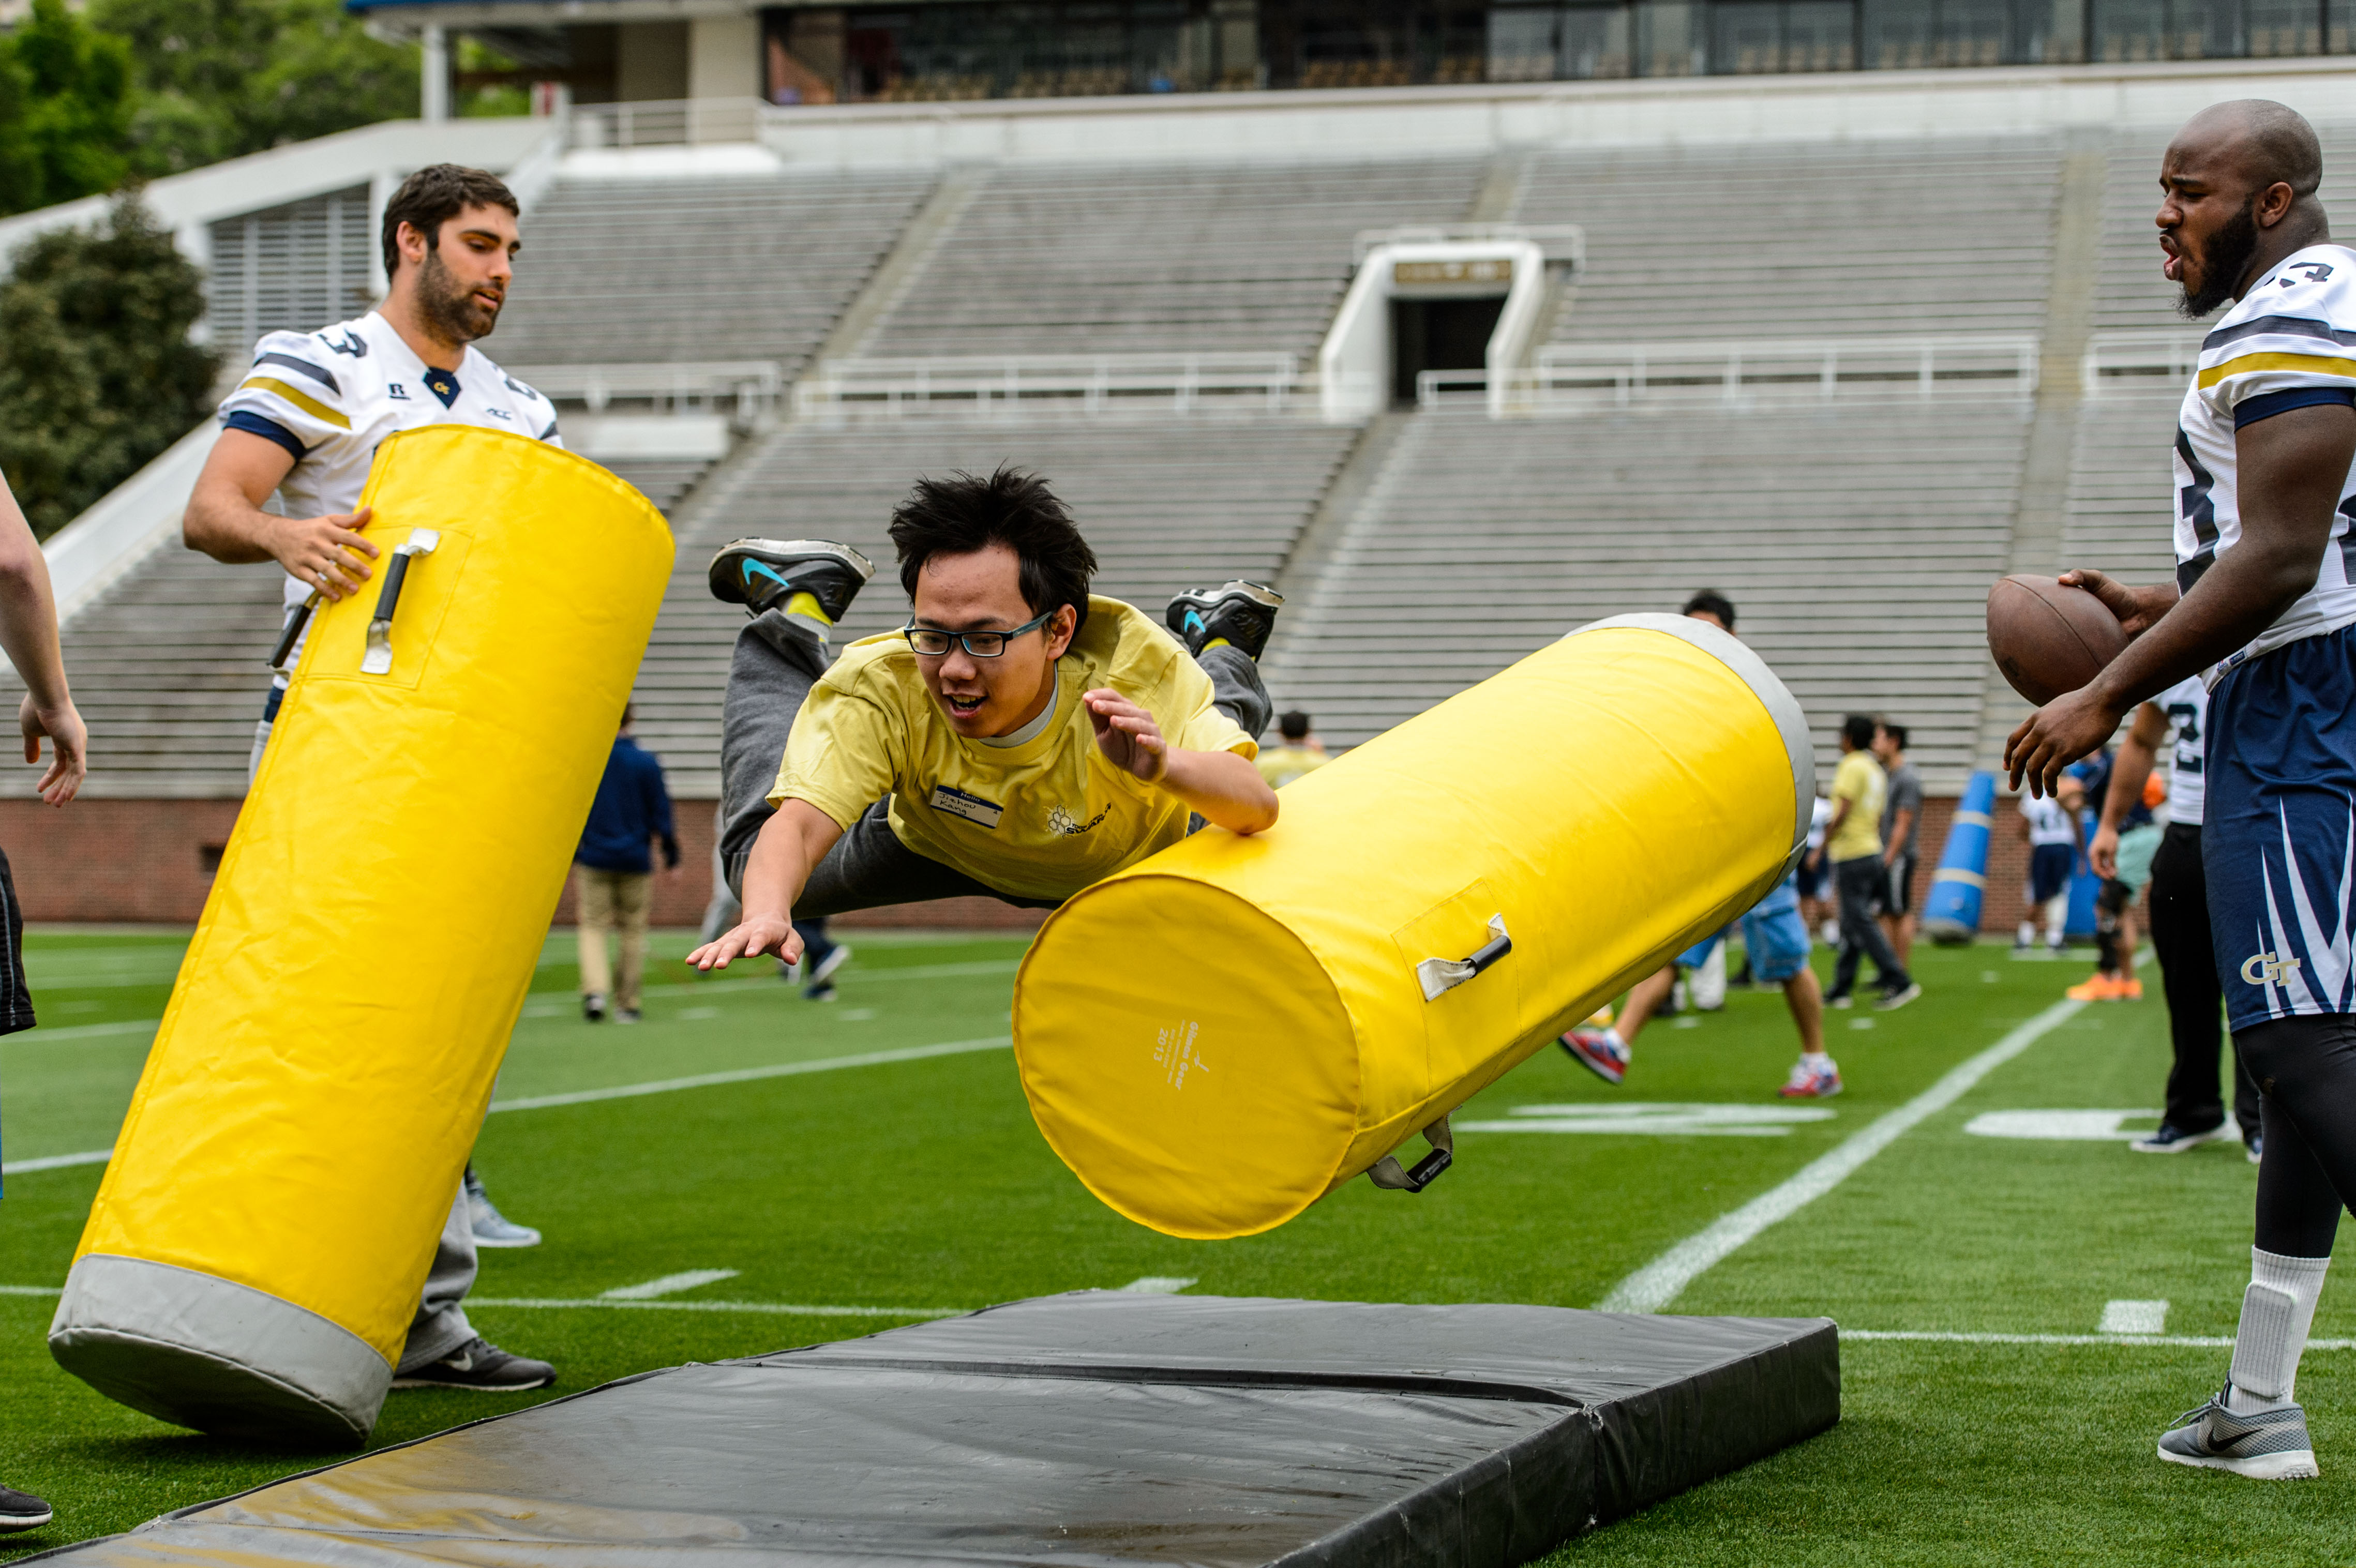 Students ran through eight different drills, including tackling dummies, during the International Football Clinic.